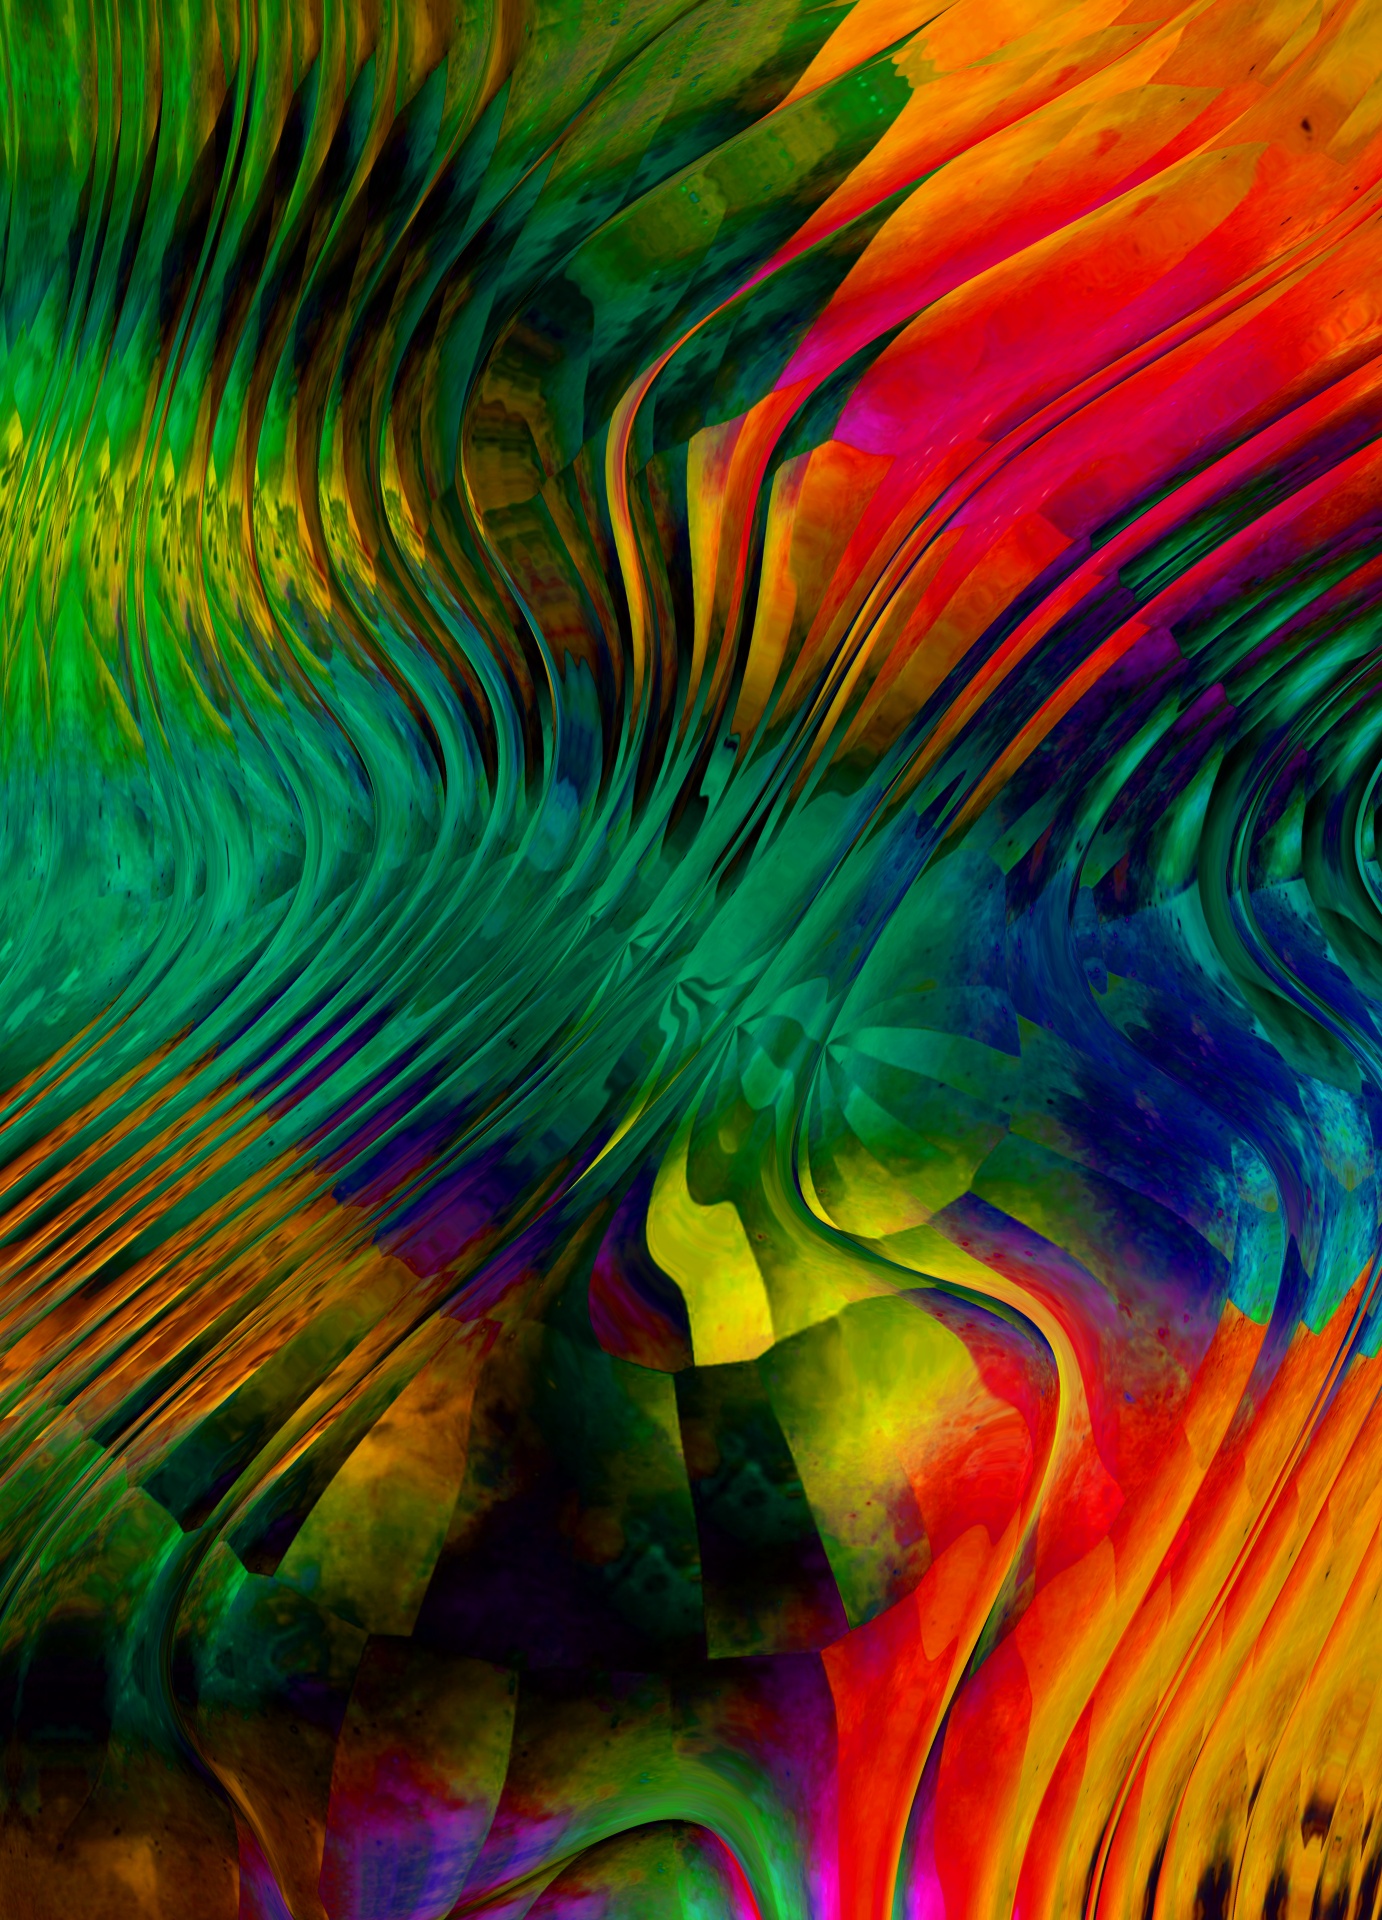 Glass Colorful Art Background